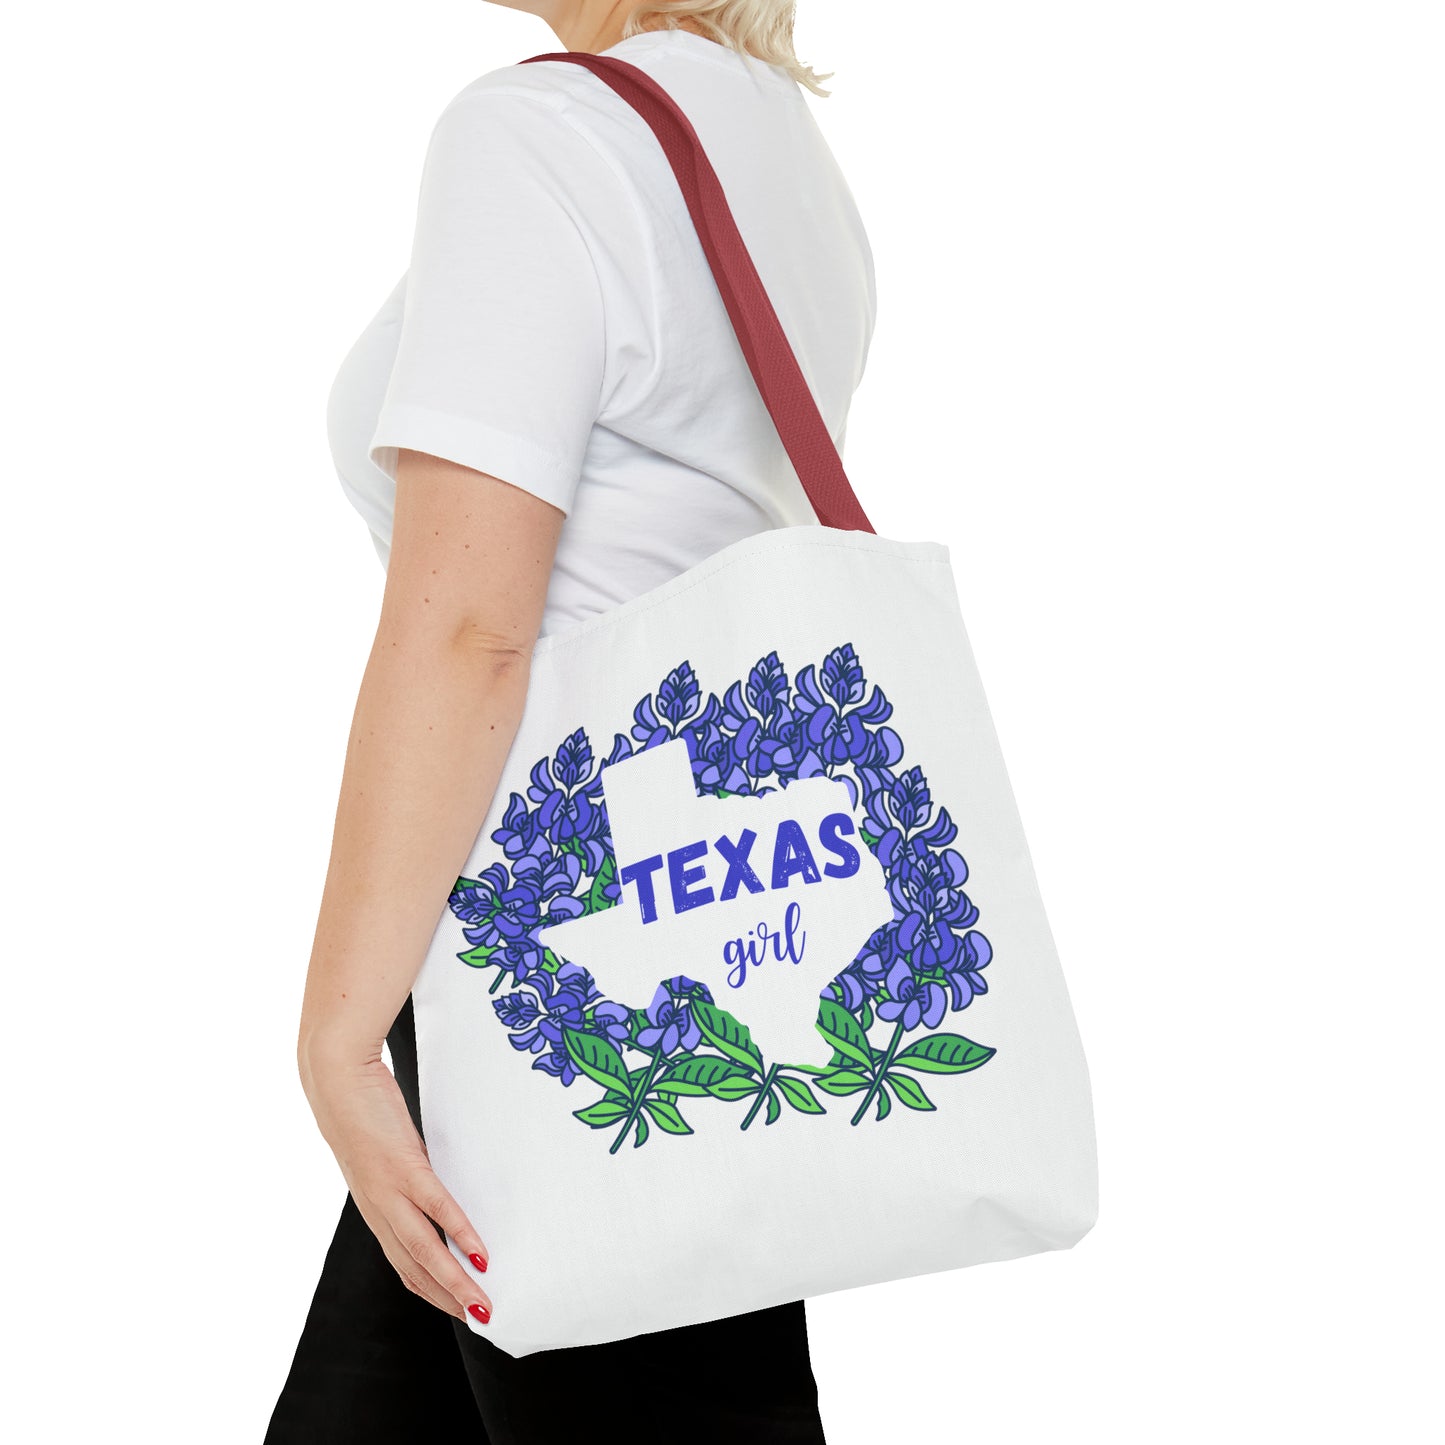 Texas Girl Bluebonnet Tote Bag, Texas Tote Bag, Book Bag, Grocery Bag, Travel Bag, Gifts For Her, Gifts For Mom, Teacher Gift, Friend Gift